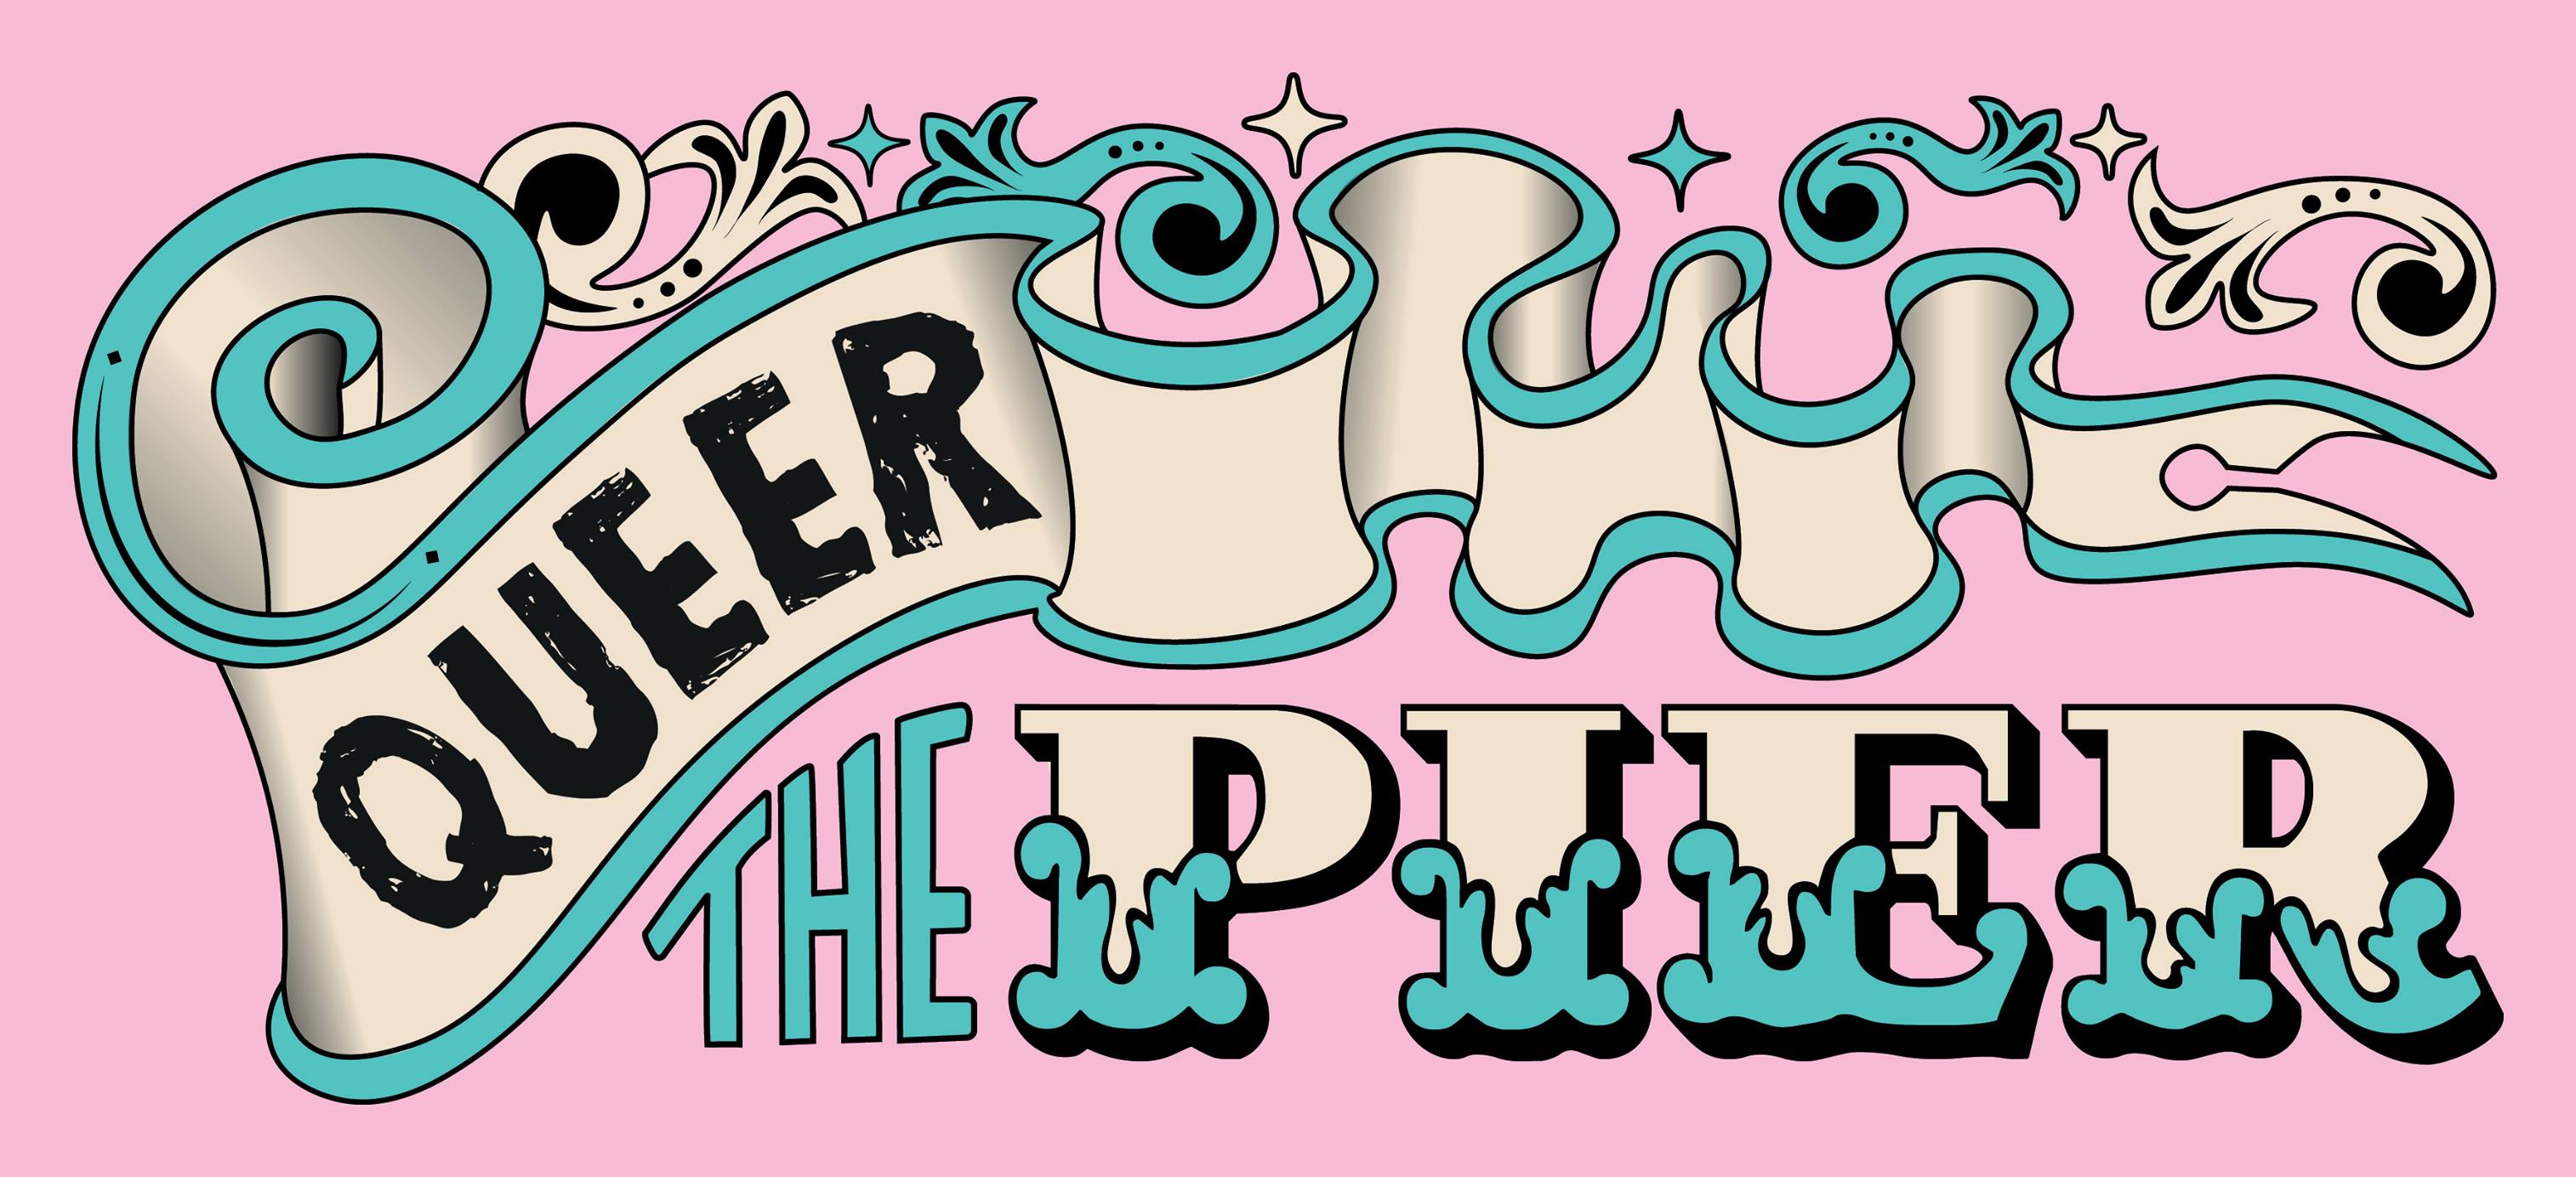 'Queer the Pier' in fairground font on a pale pink background.